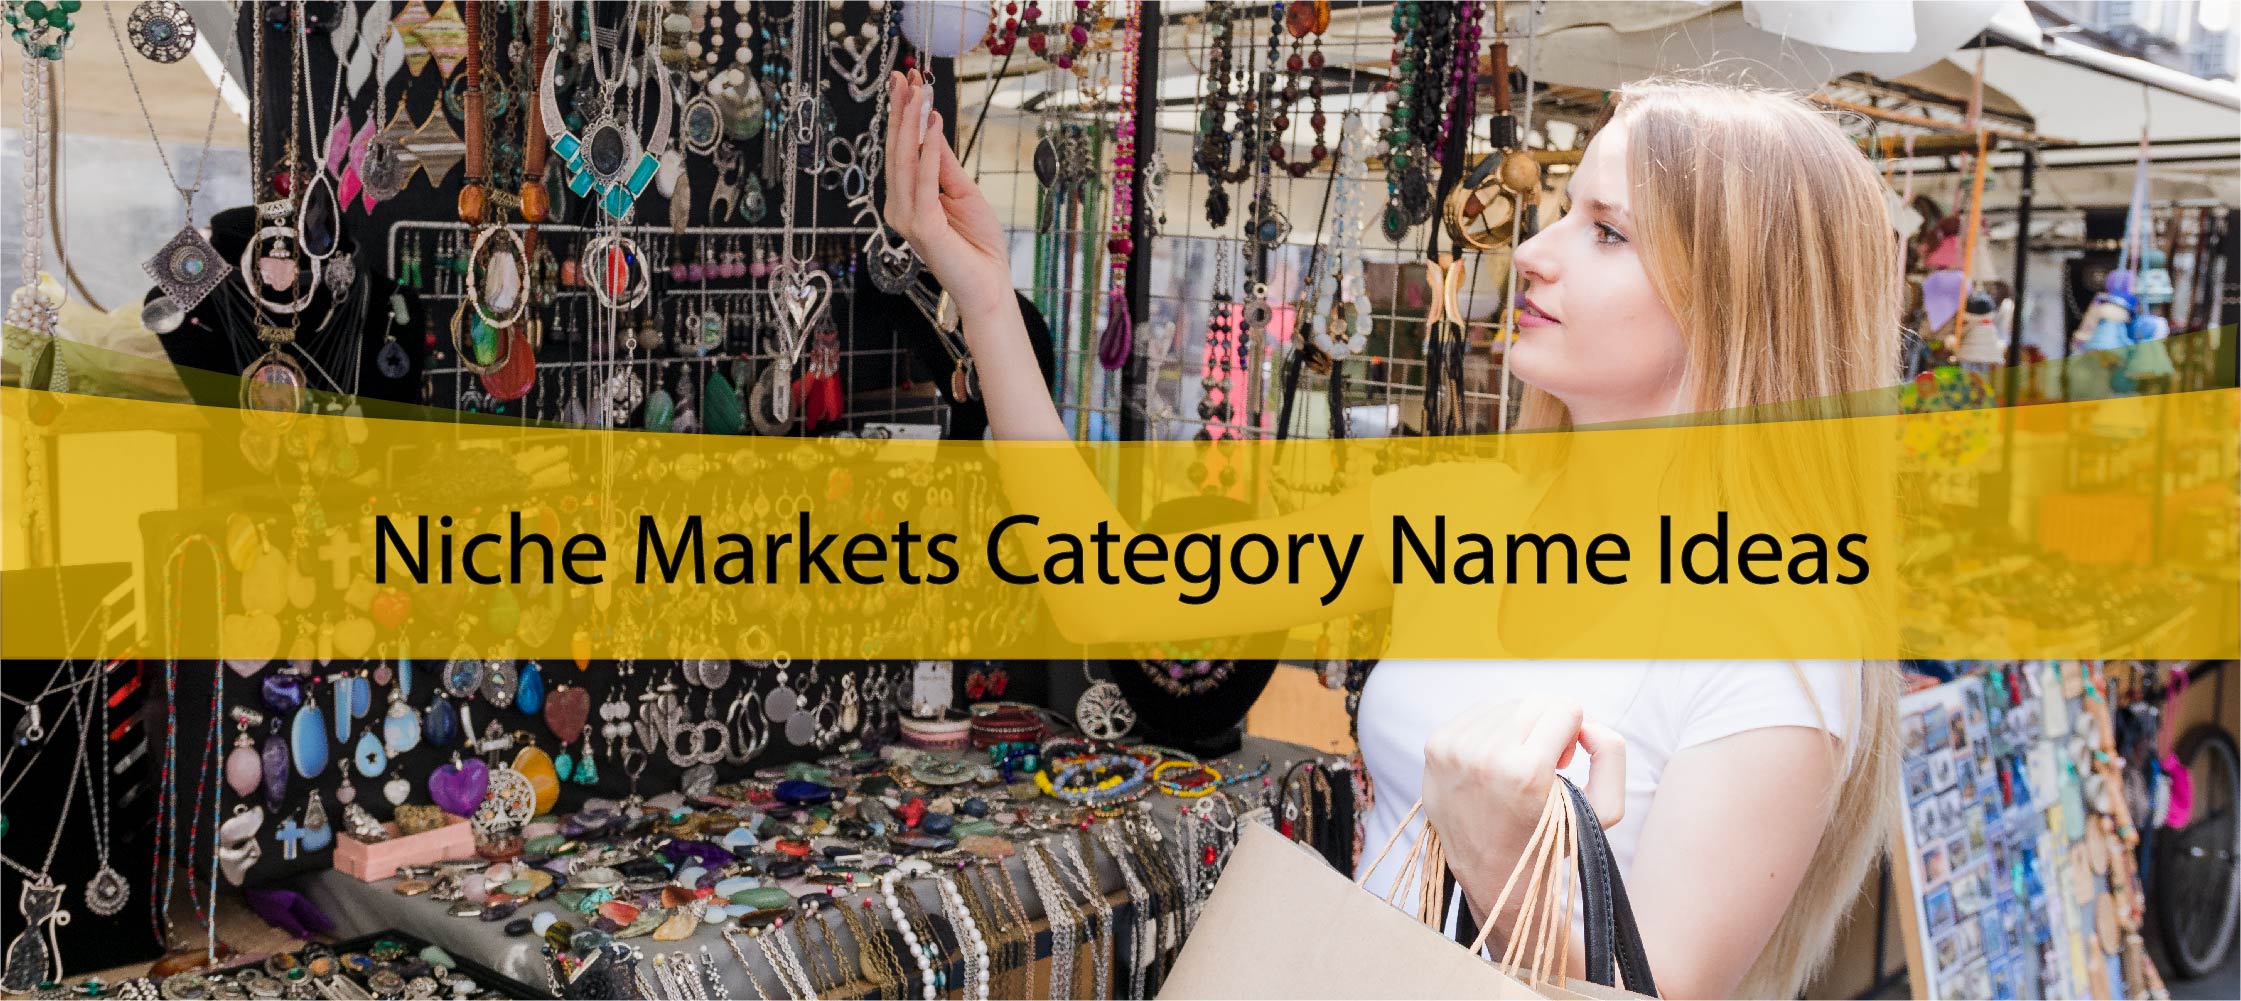 Niche Markets Category Name Ideas